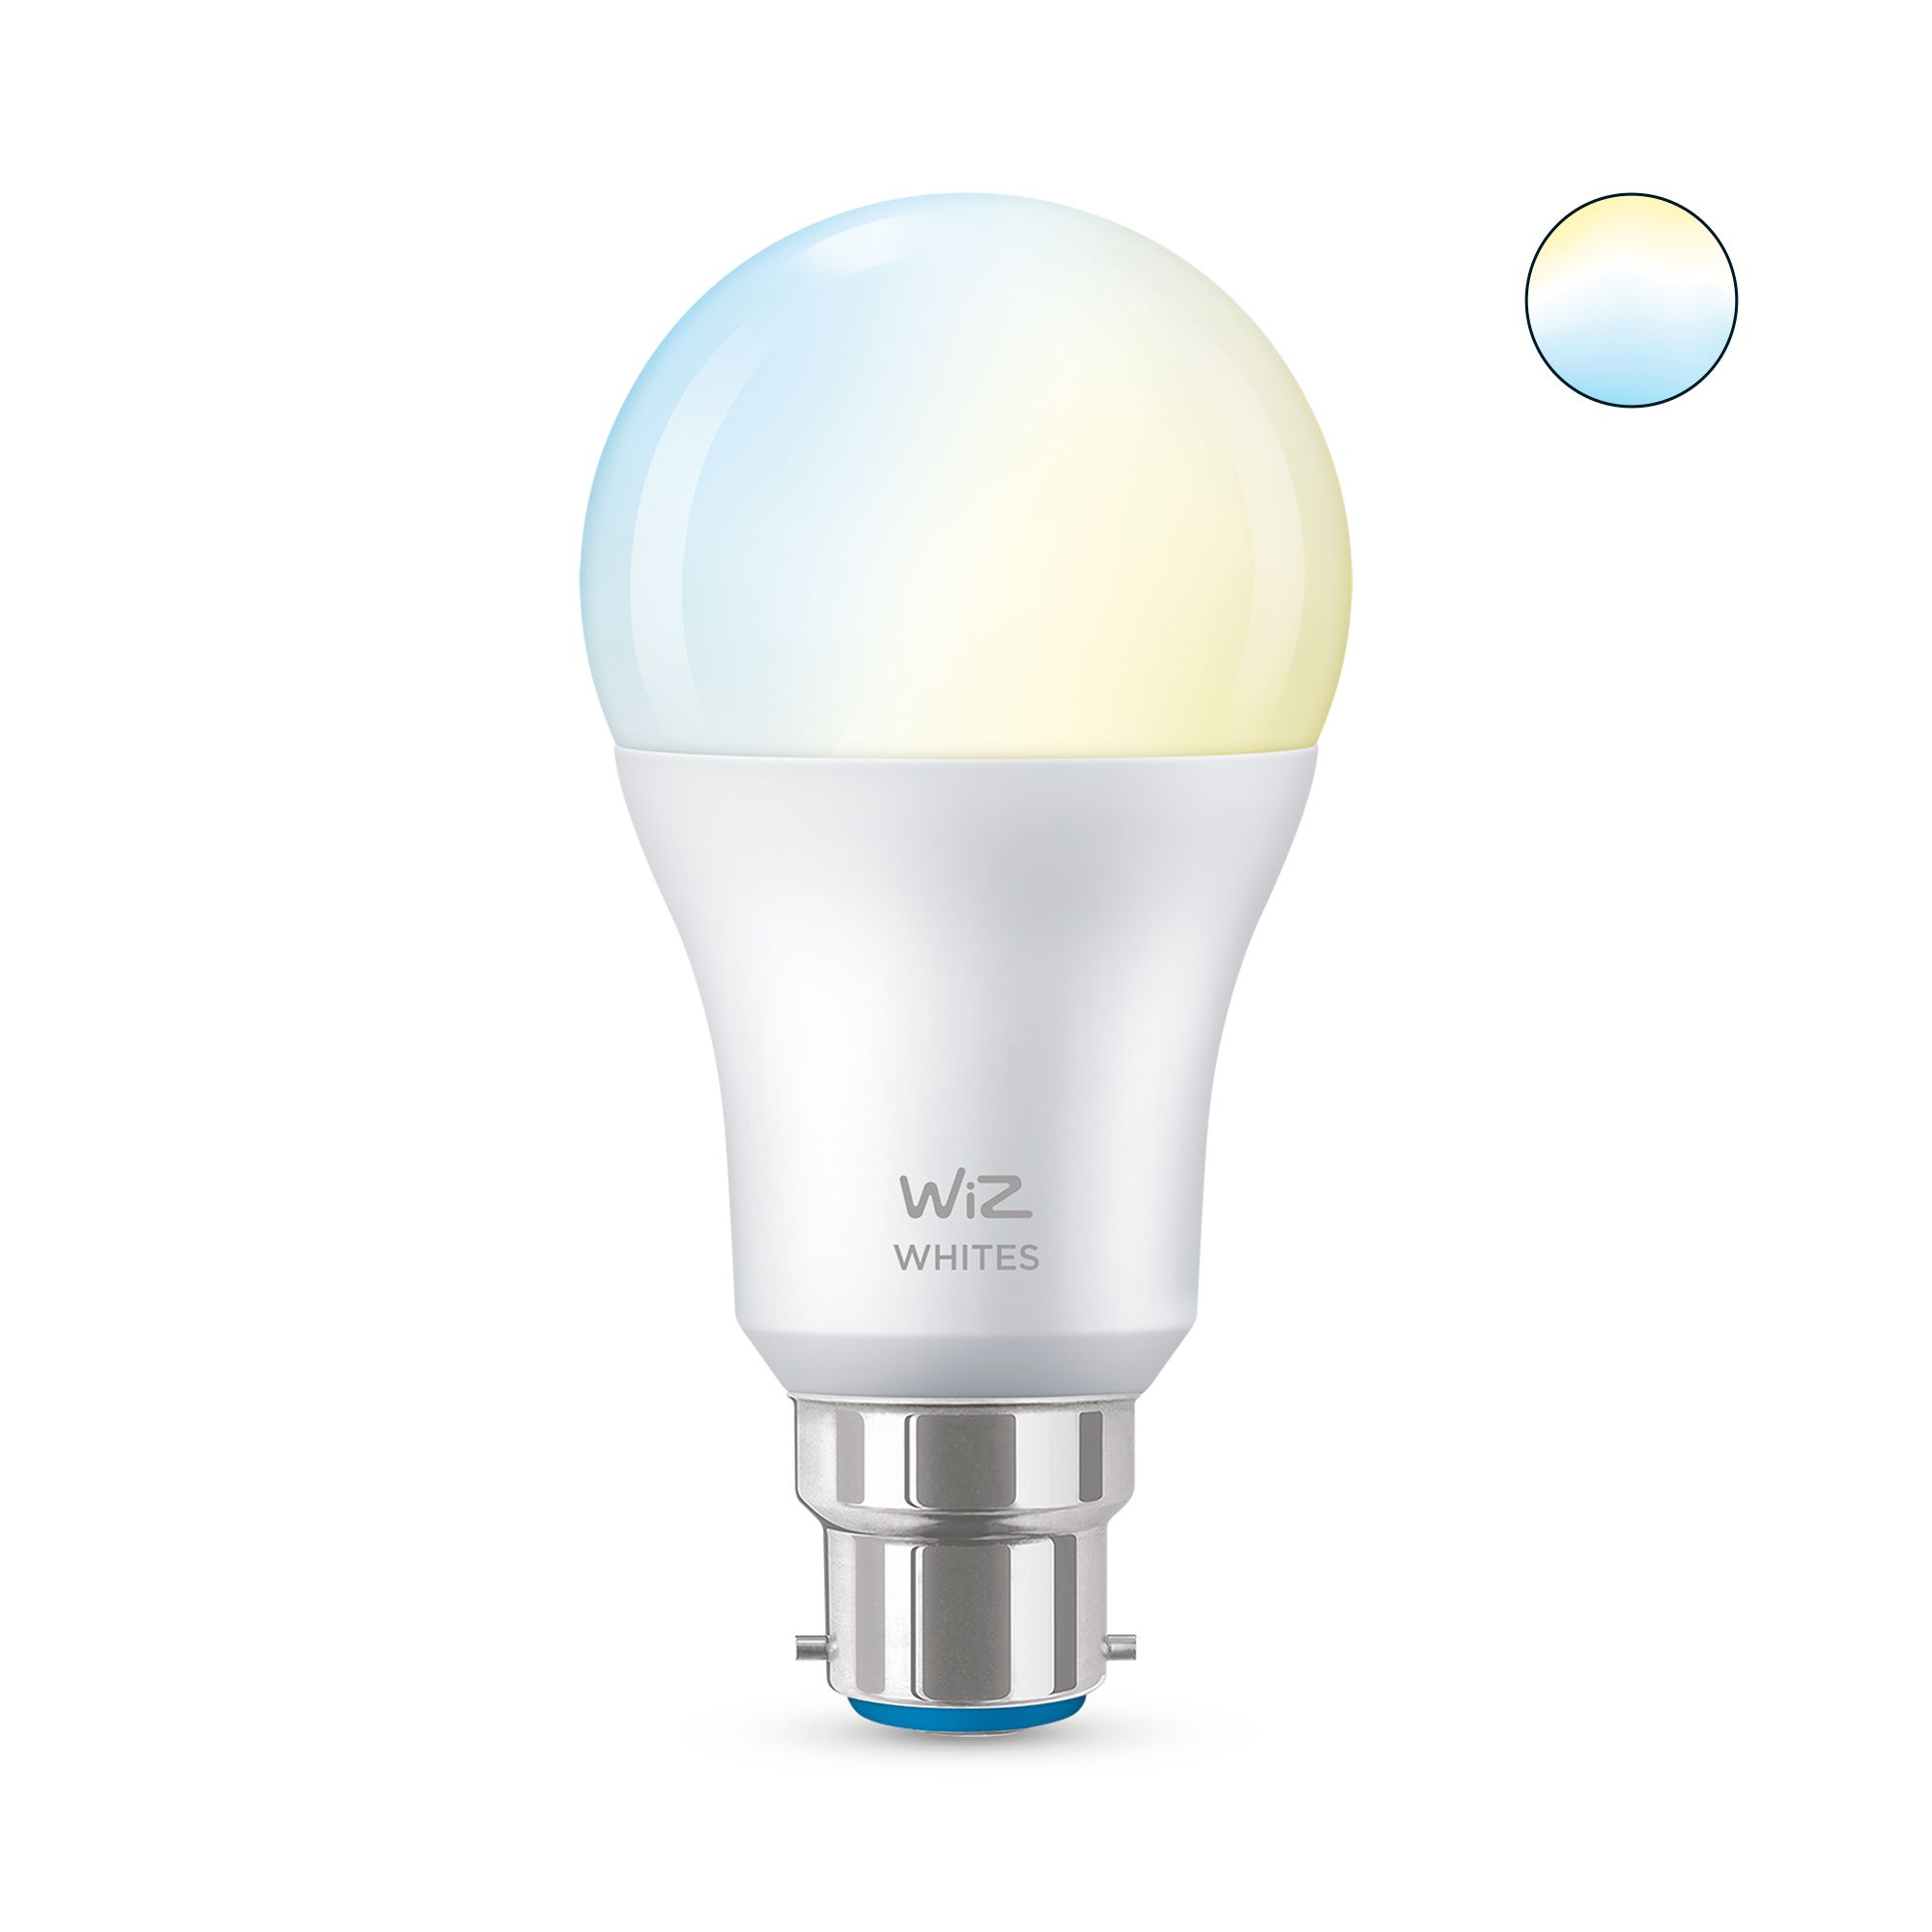 Details about   WiZ A60 B22 800lm Colour Adjustable Wi-Fi Smart Lamp-HONG KONG BRAND 